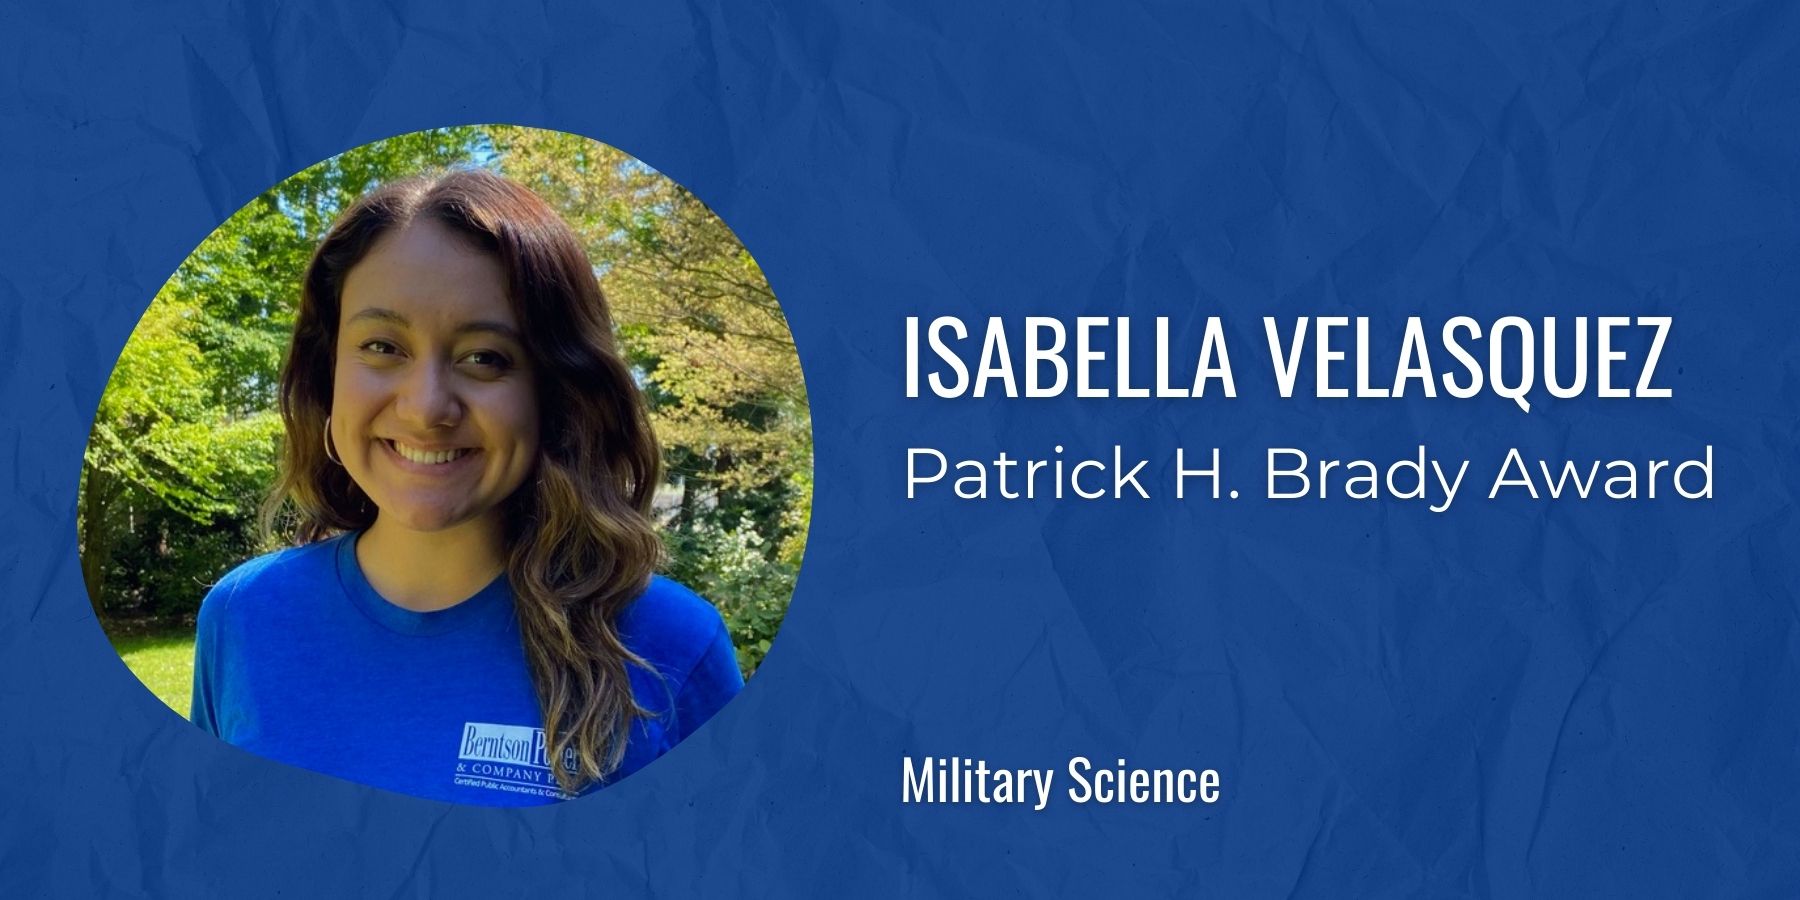 mage of Isabella Velasquez with text: Patrick H. Brady Award, Military Science

